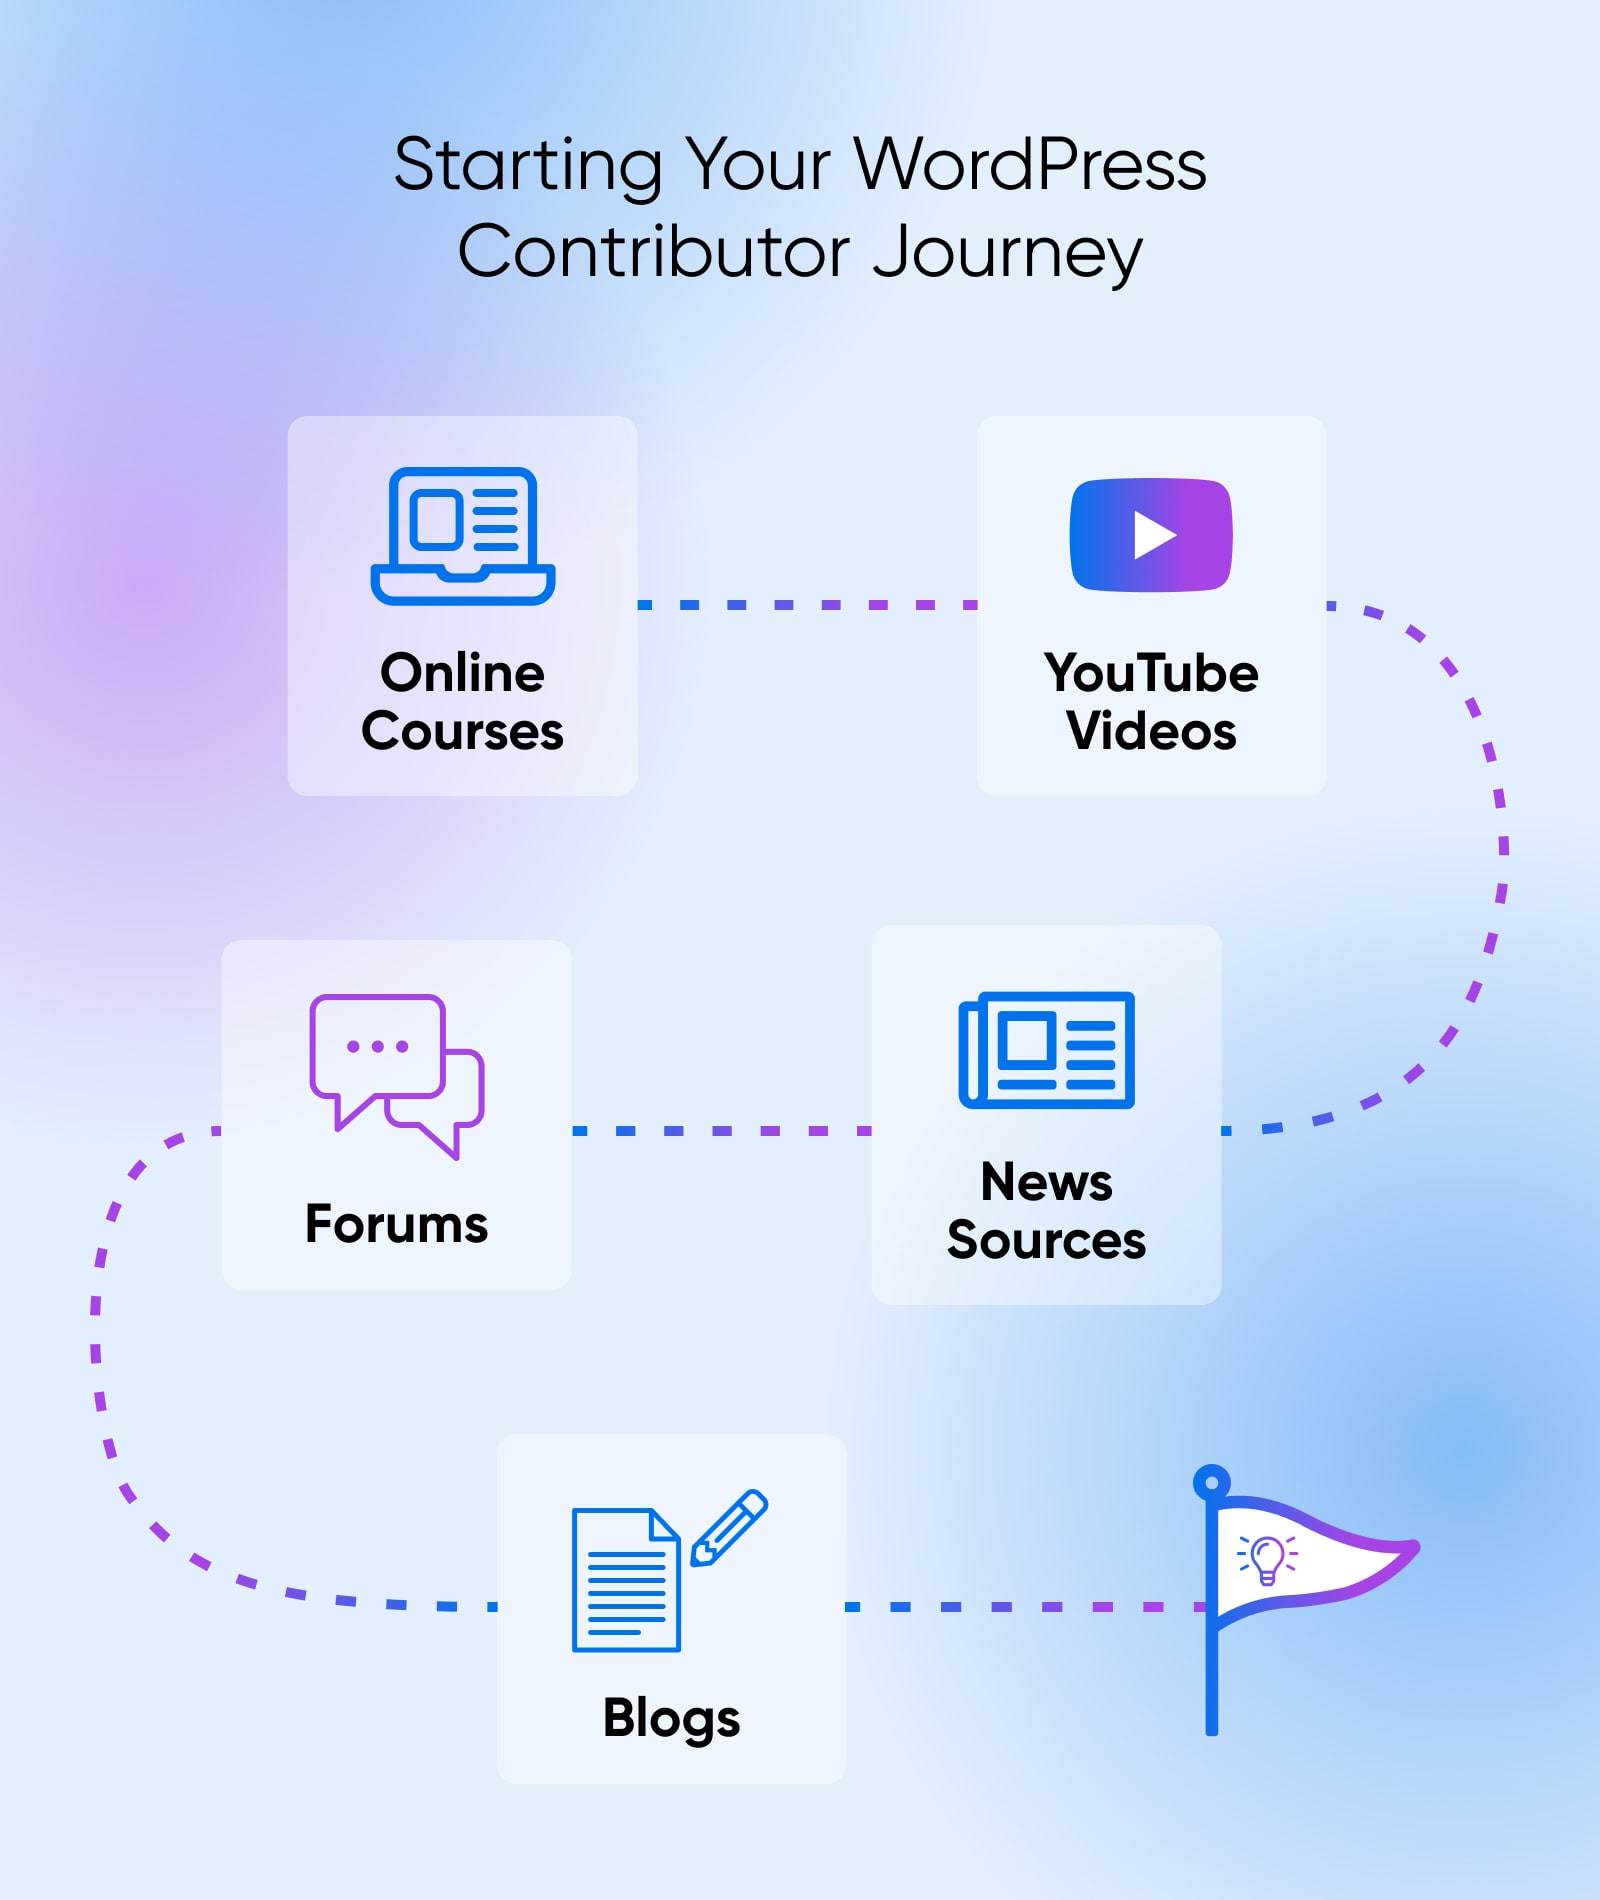 roadmap of the WP journey online classes to youtube videos to forums to news sources to blogs